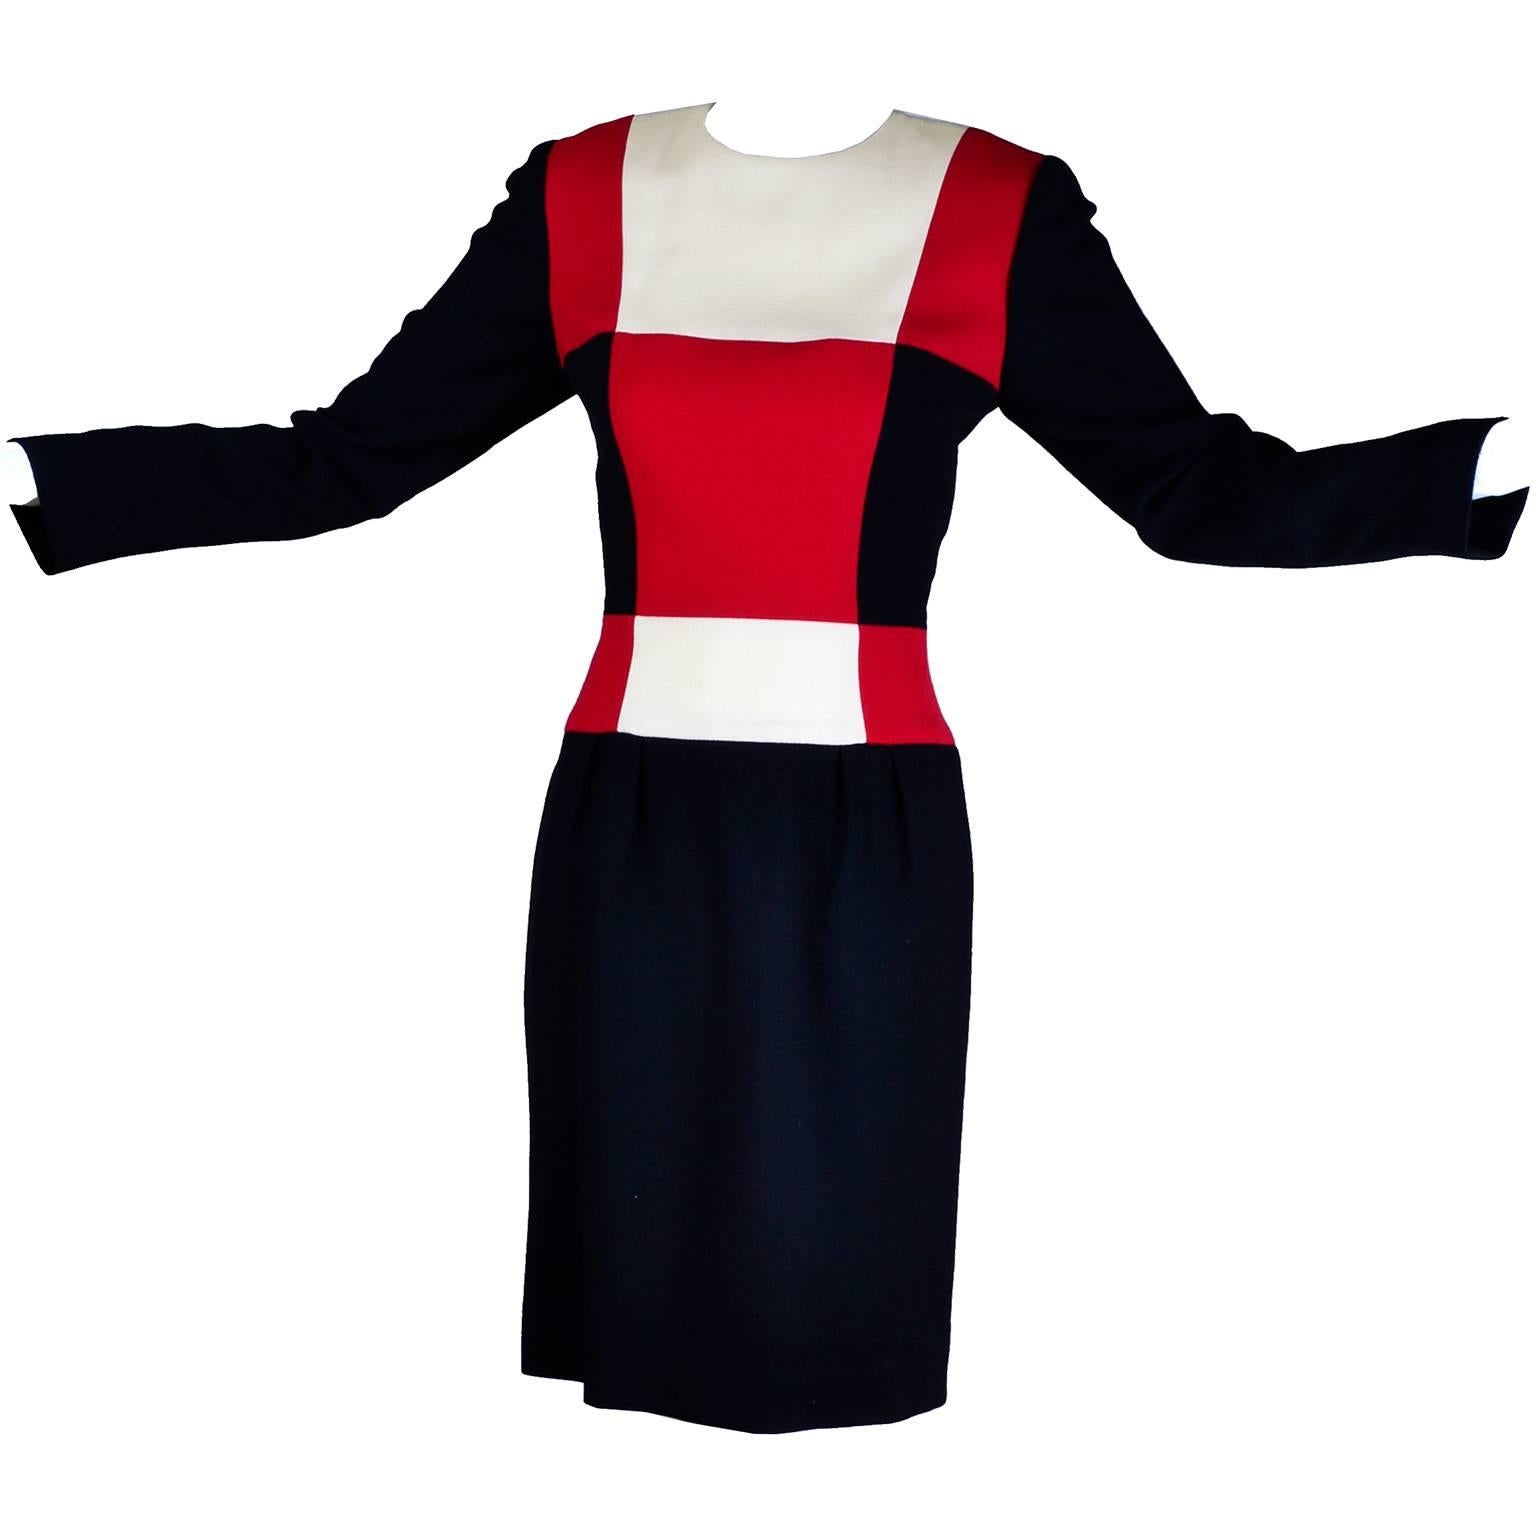 This vintage Scaasi dress is from the 1980's and has a hidden back zipper and great color block design. The fabric is a black wool crepe or wool blend with red, black and cream squares that go from the shoulders to the beginning of the hips.  The